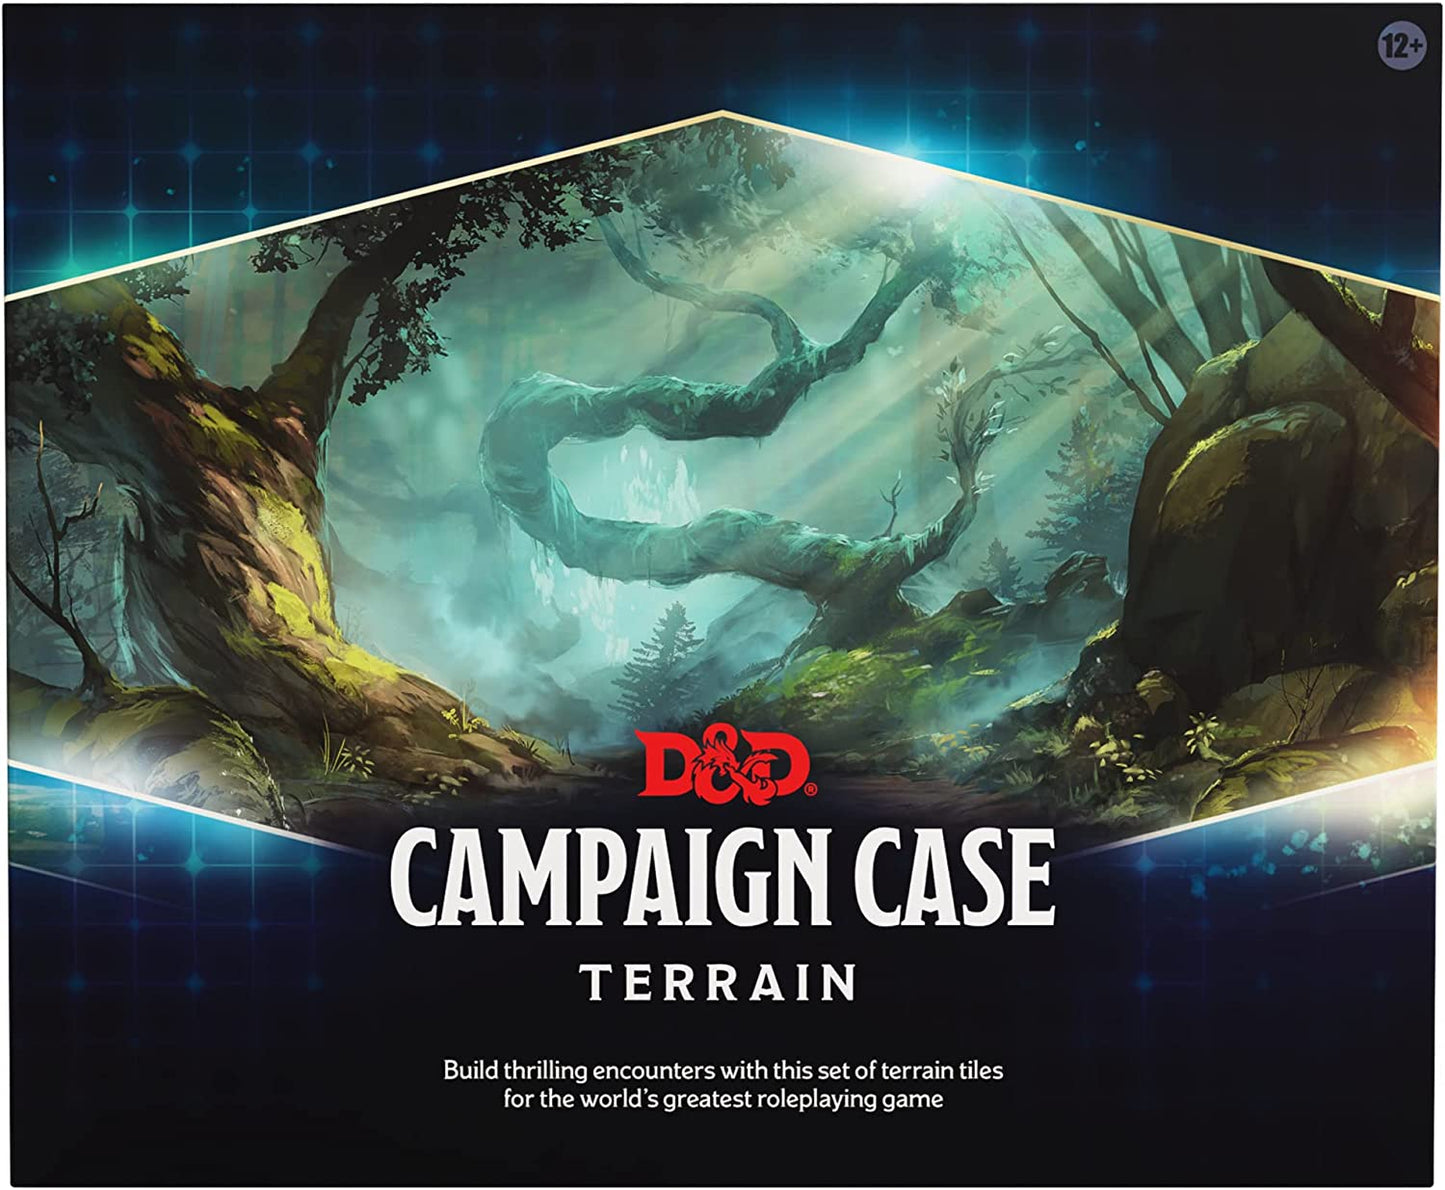 Dungeons & Dragons RPG: Campaign Case Terrain